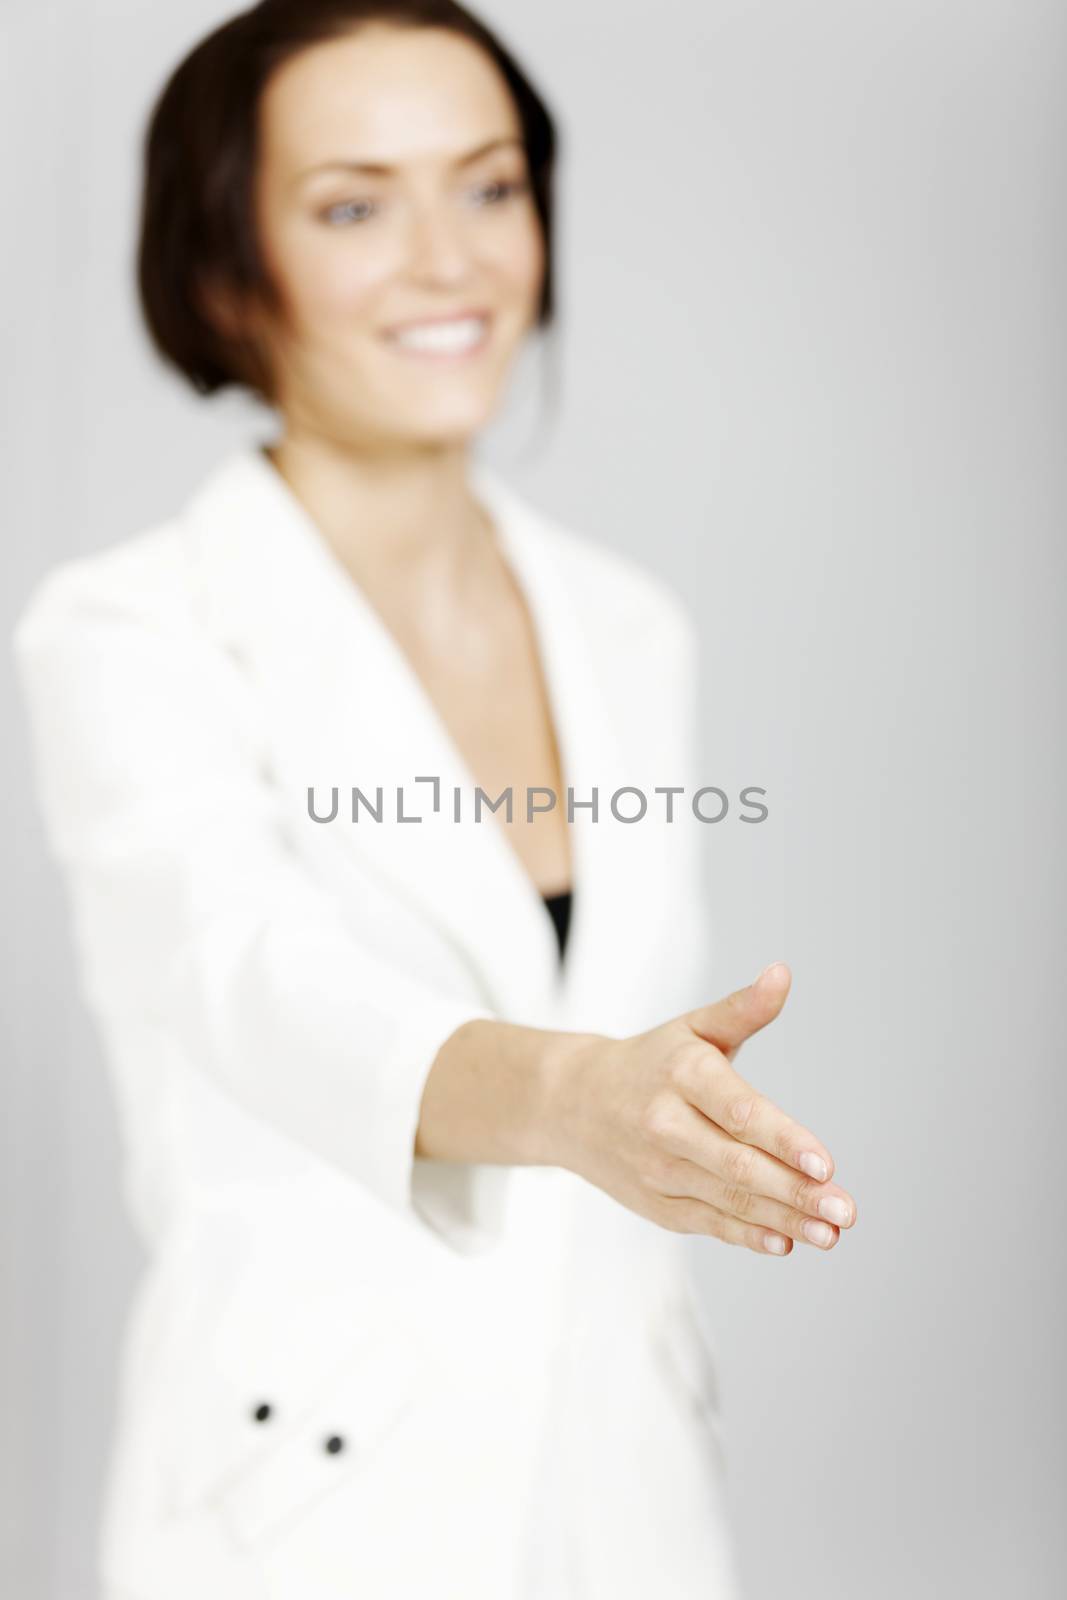 Young business woman extending her hand in greeting